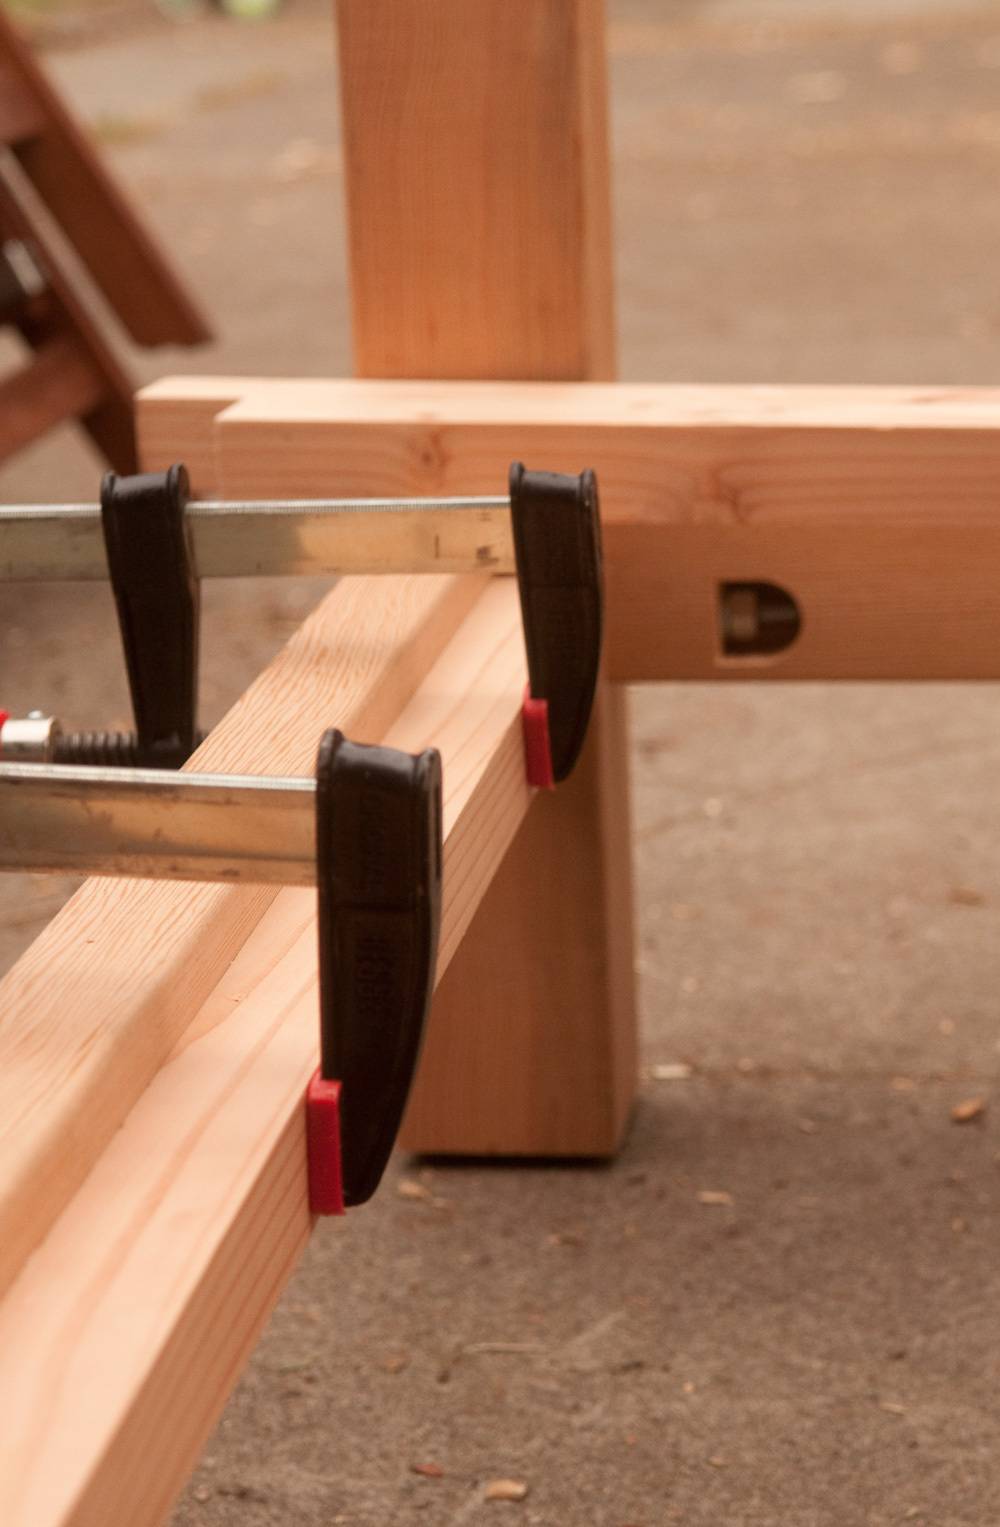 Two clamps holding together a piece of wood.